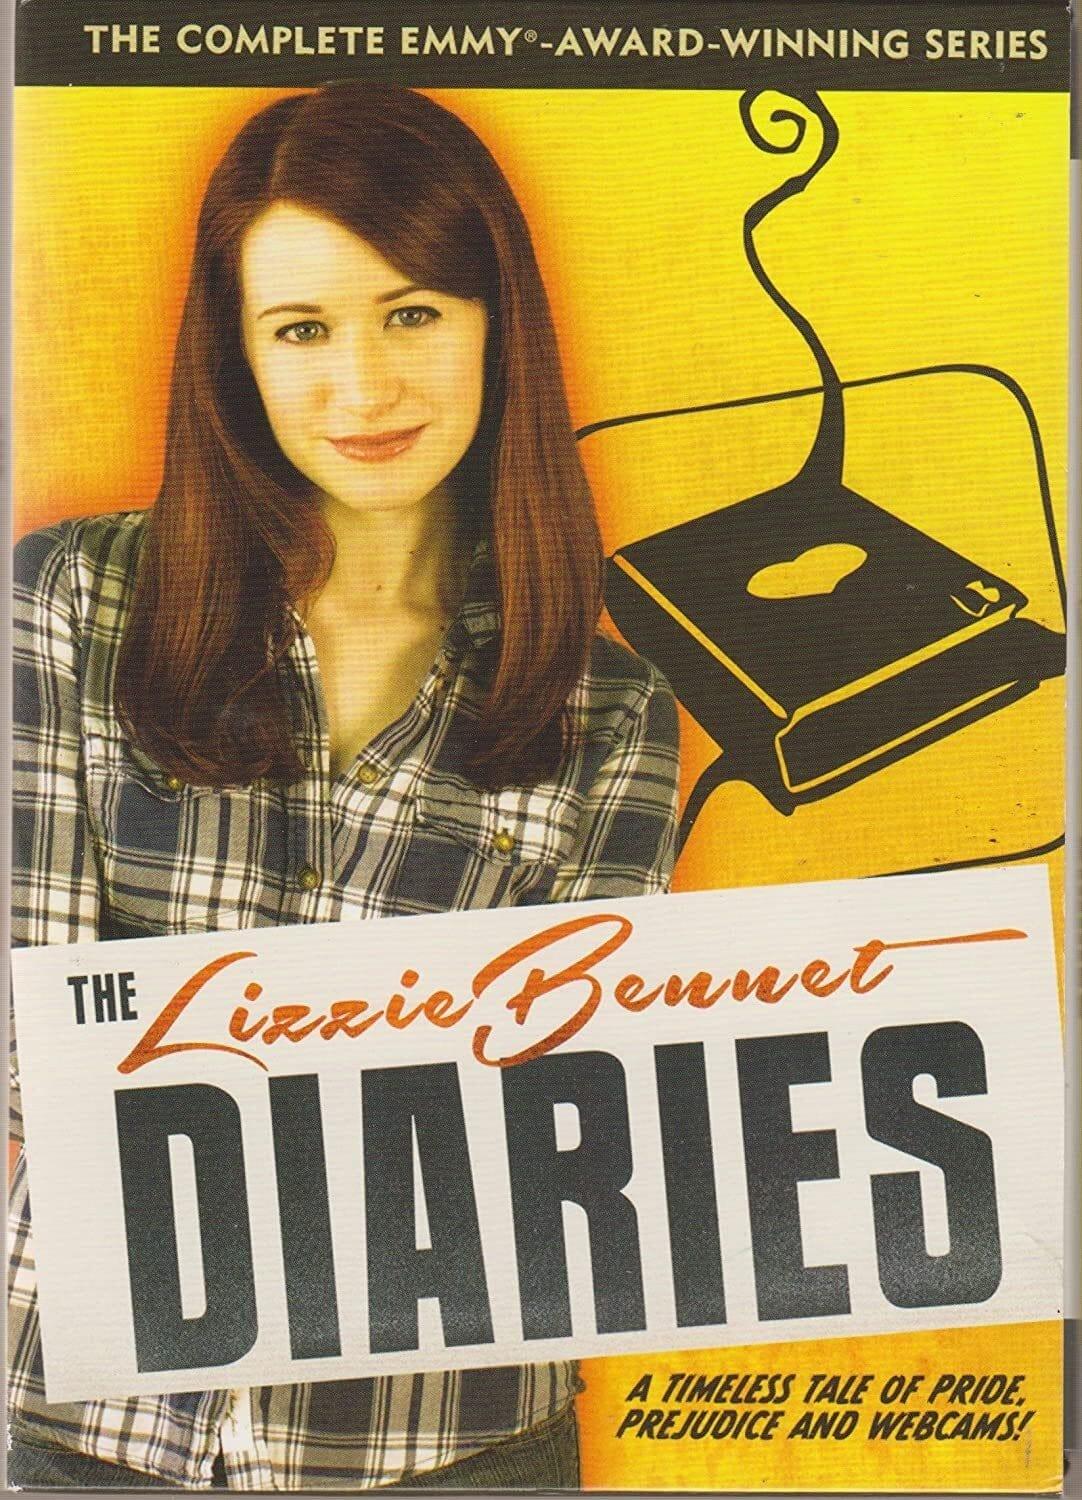 The Lizzie Bennet Diaries poster